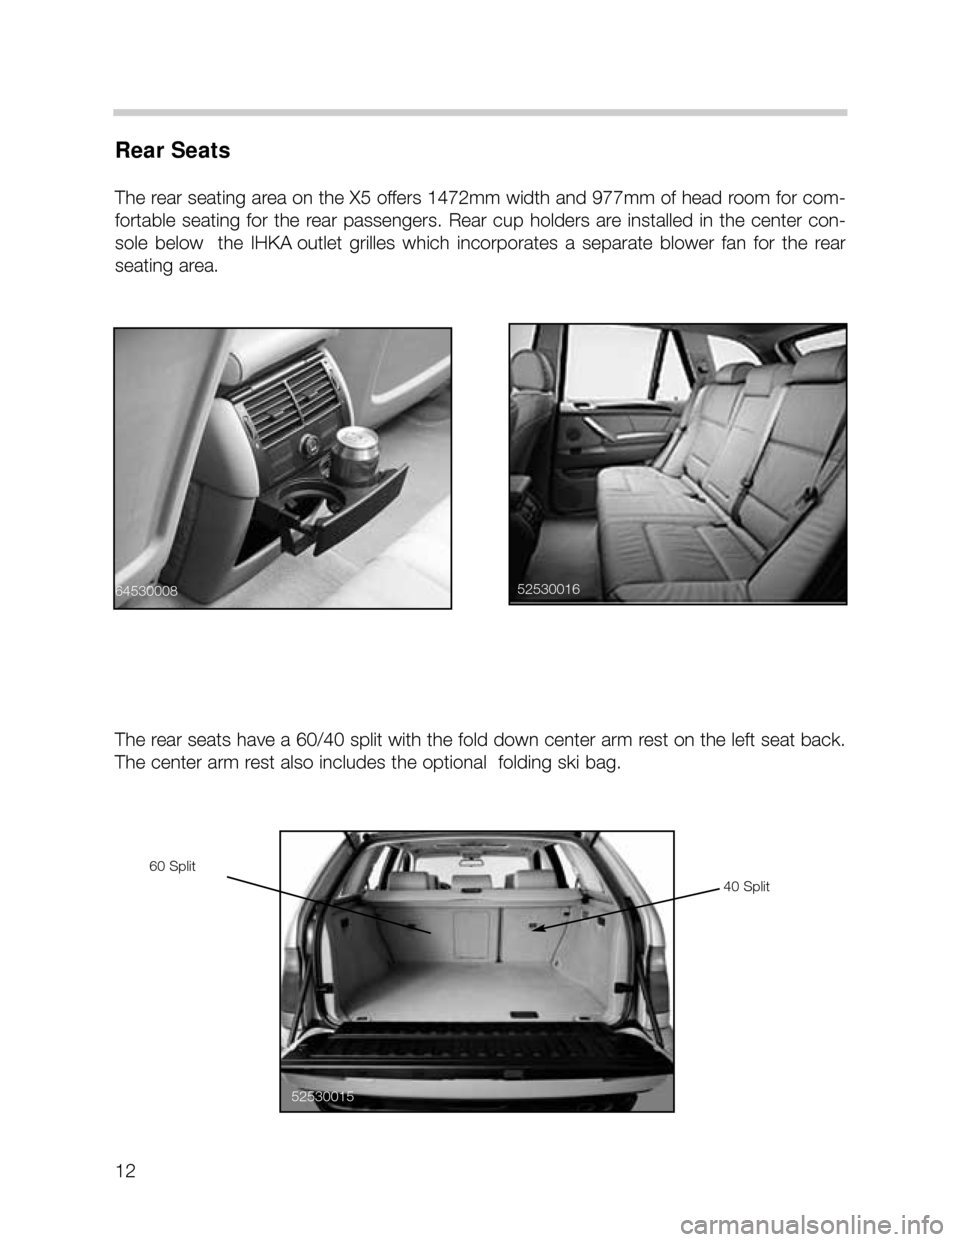 BMW X5 2001 E53 User Guide 12
Rear Seats
The rear seating area on the X5 offers 1472mm width and 977mm of head room for com-
fortable  seating  for  the  rear  passengers.  Rear  cup  holders  are  installed  in  the  center  c